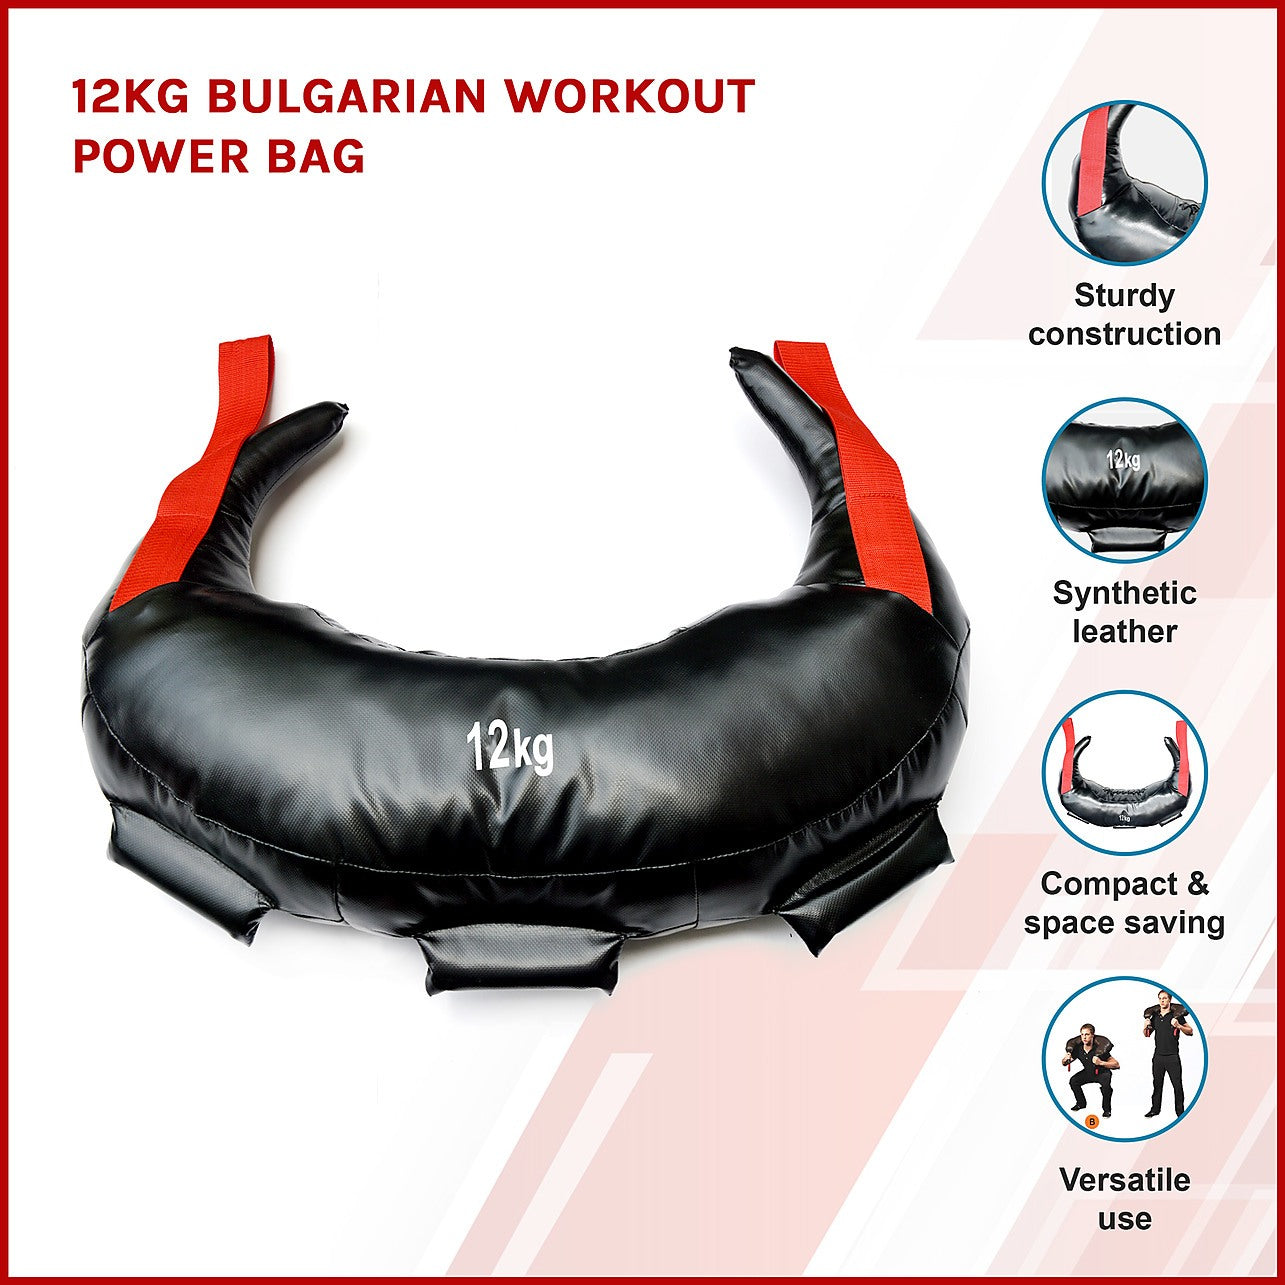 12kg Bulgarian Workout Power Bag - Sports & Fitness > Weights